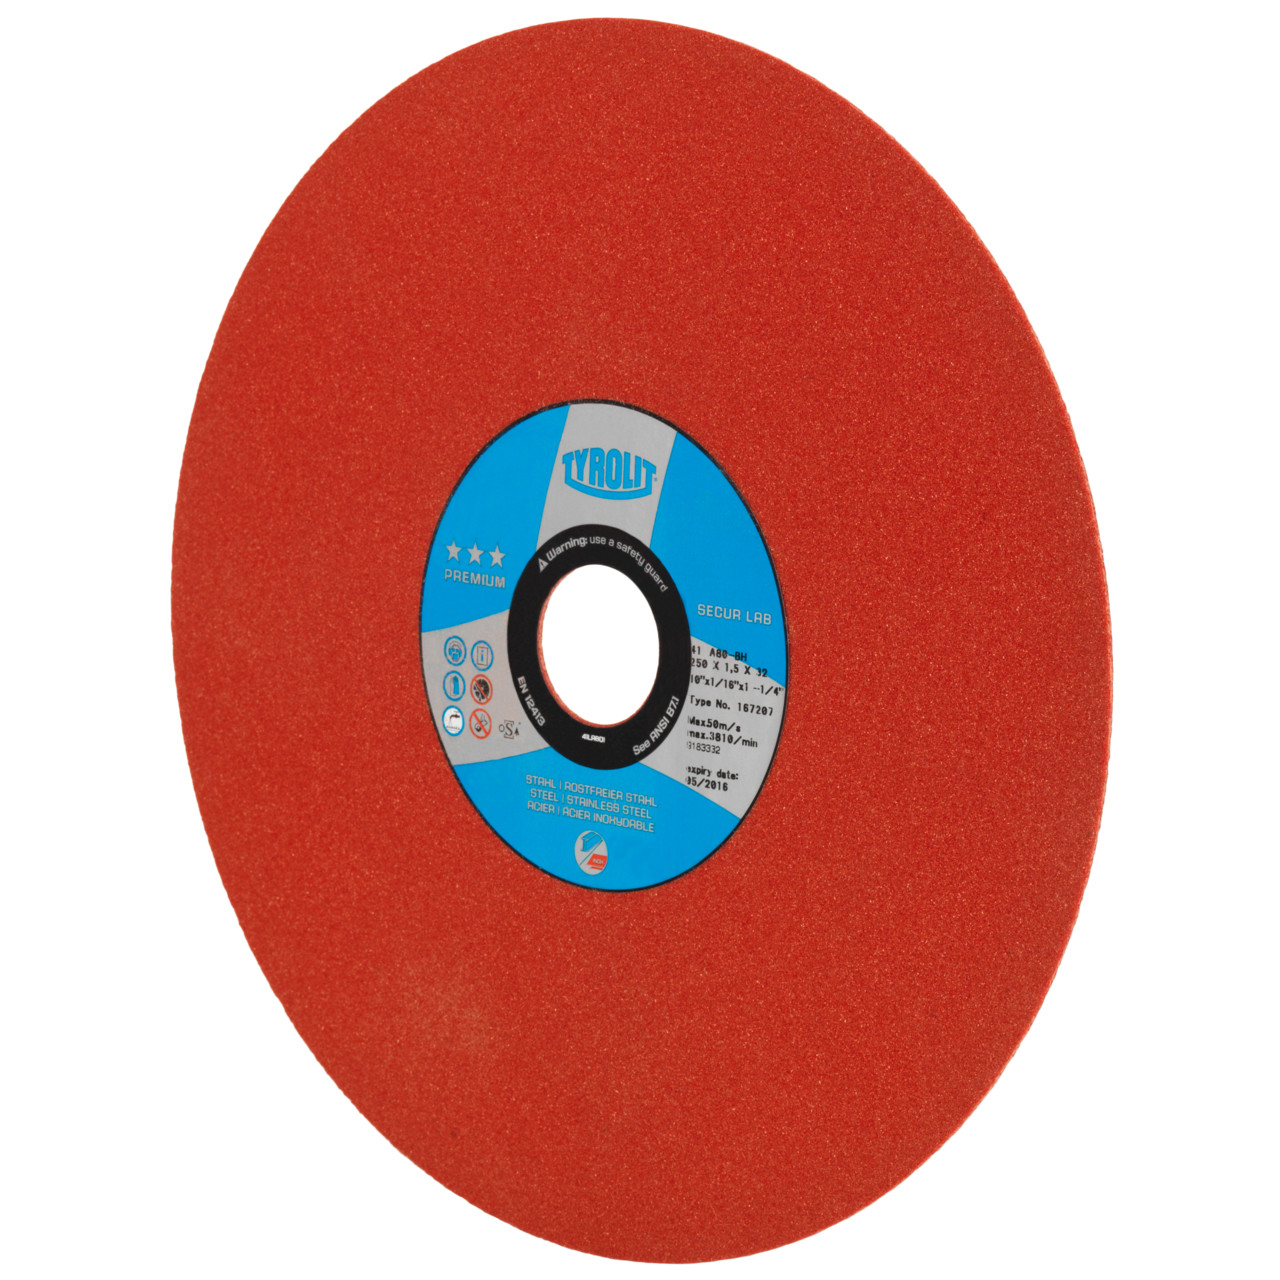 Tyrolit Laboratory cutting discs DxDxH 350x2.5x32 For steel and stainless steel, shape: 41N - straight version (non-woven cutting disc), Art. 597383